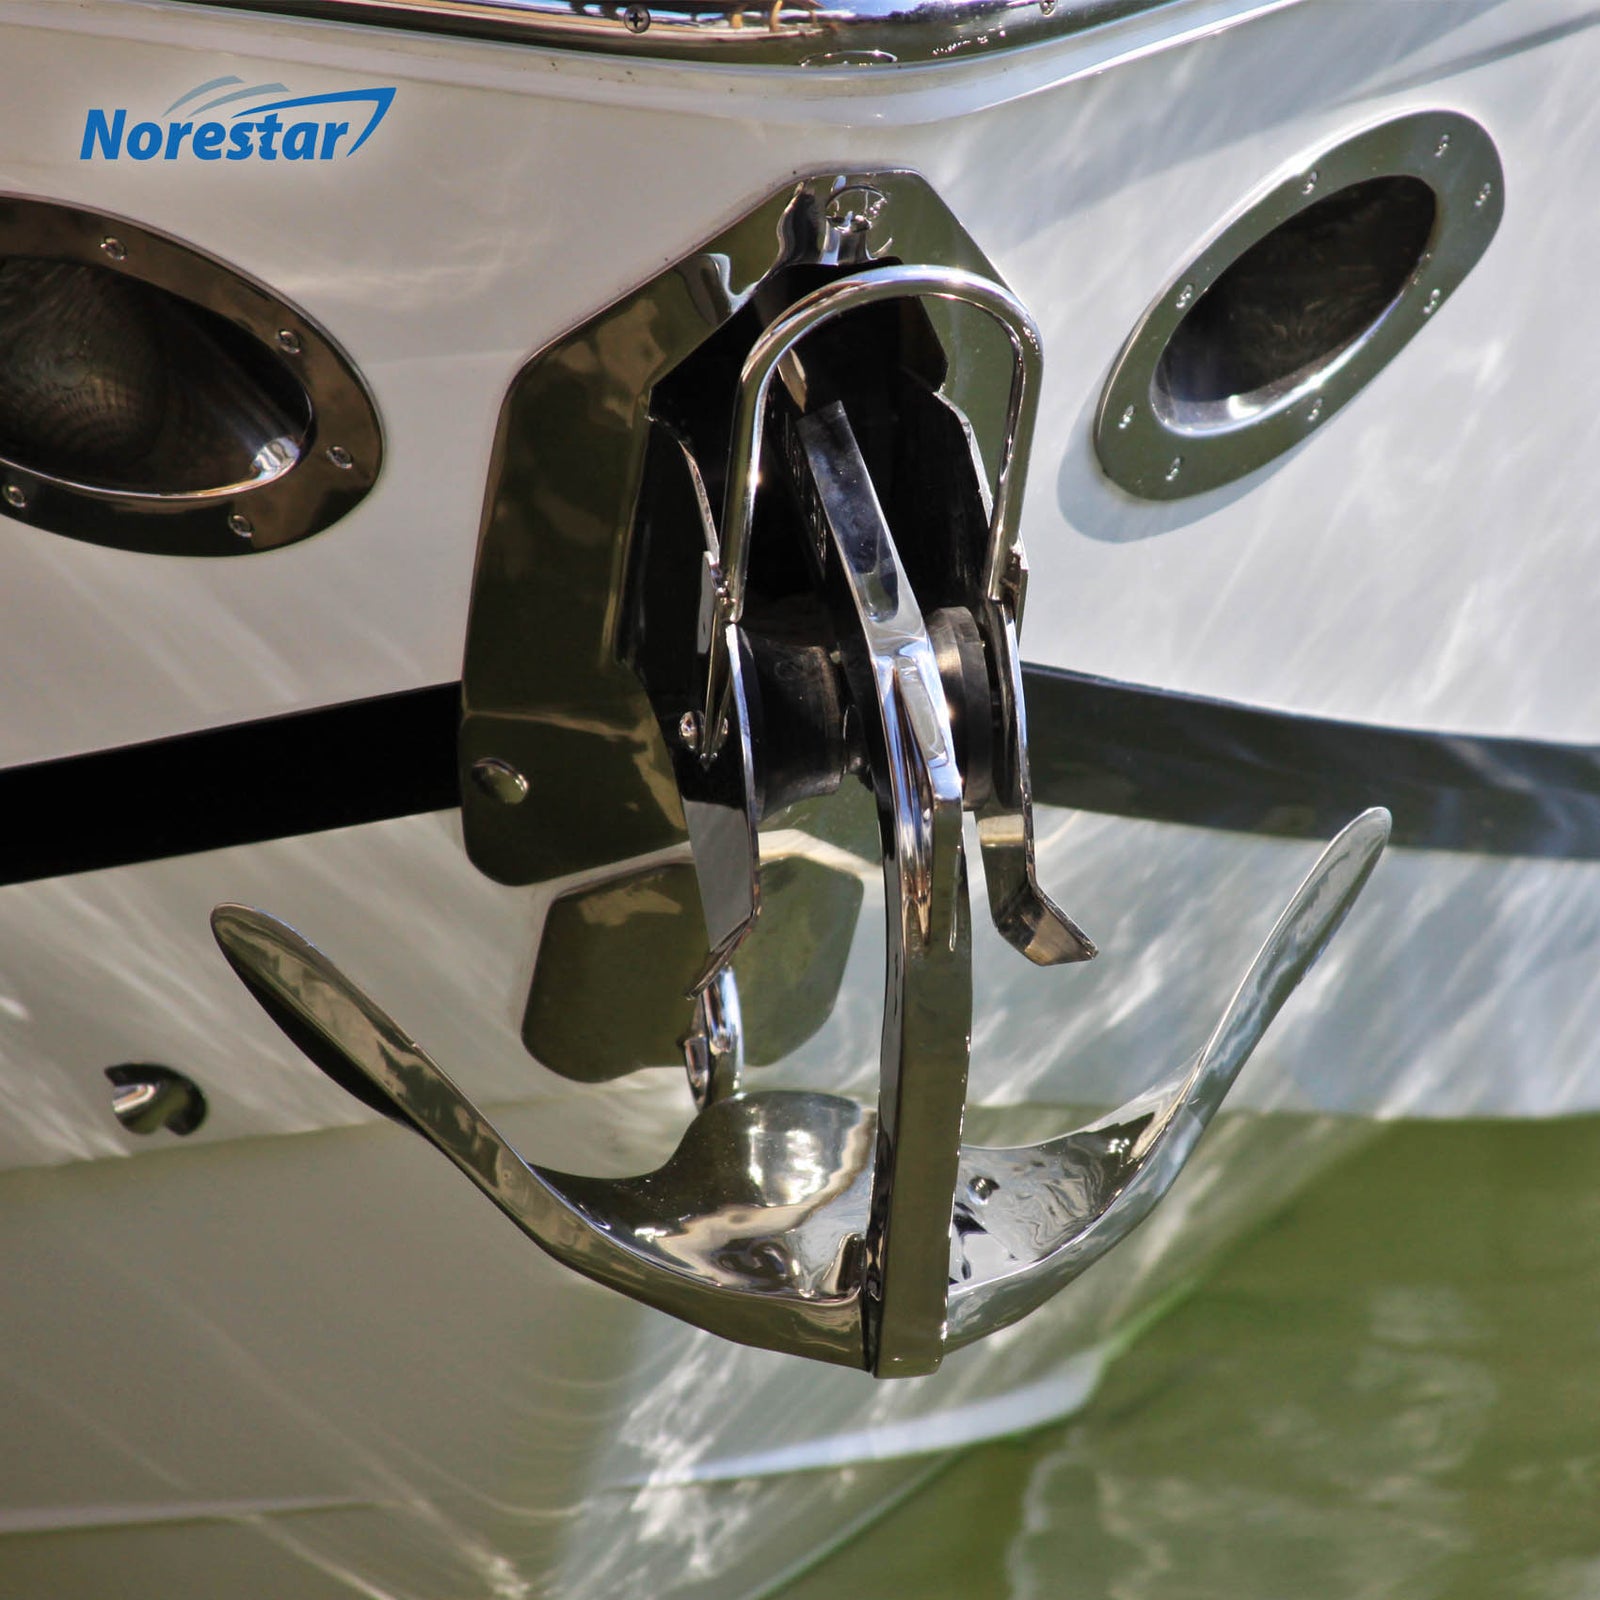 Stainless Steel Bruce/Claw Boat Anchor by Norestar - Mounted